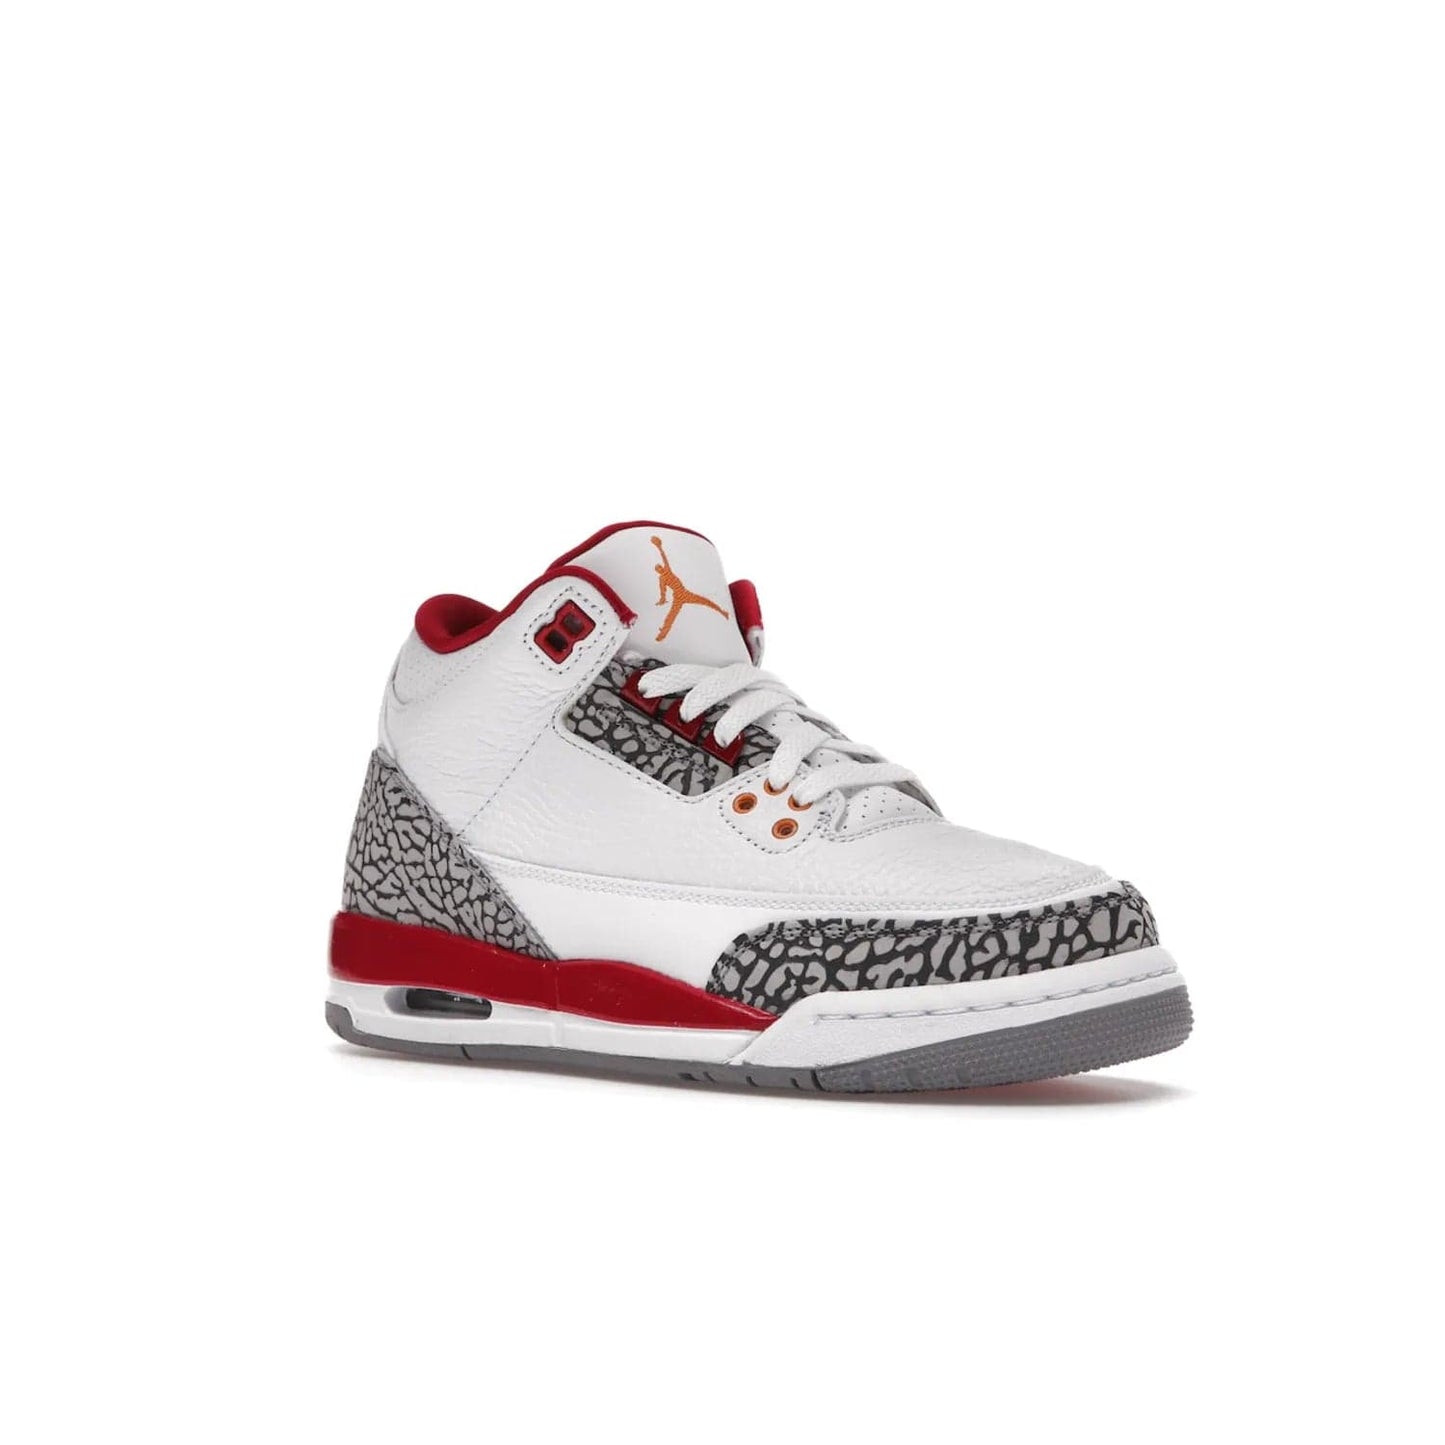 Jordan 3 Retro Cardinal (GS) - Image 5 - Only at www.BallersClubKickz.com - Shop the kid-sized Air Jordan 3 Retro Cardinal GS, released Feb 2022. White tumbled leather upper, light curry accenting, cement grey and classic red details throughout. Visible Air cushioning, midsole, and an eye-catching outsole. Show off your style with this fashionable streetwear silhouette.